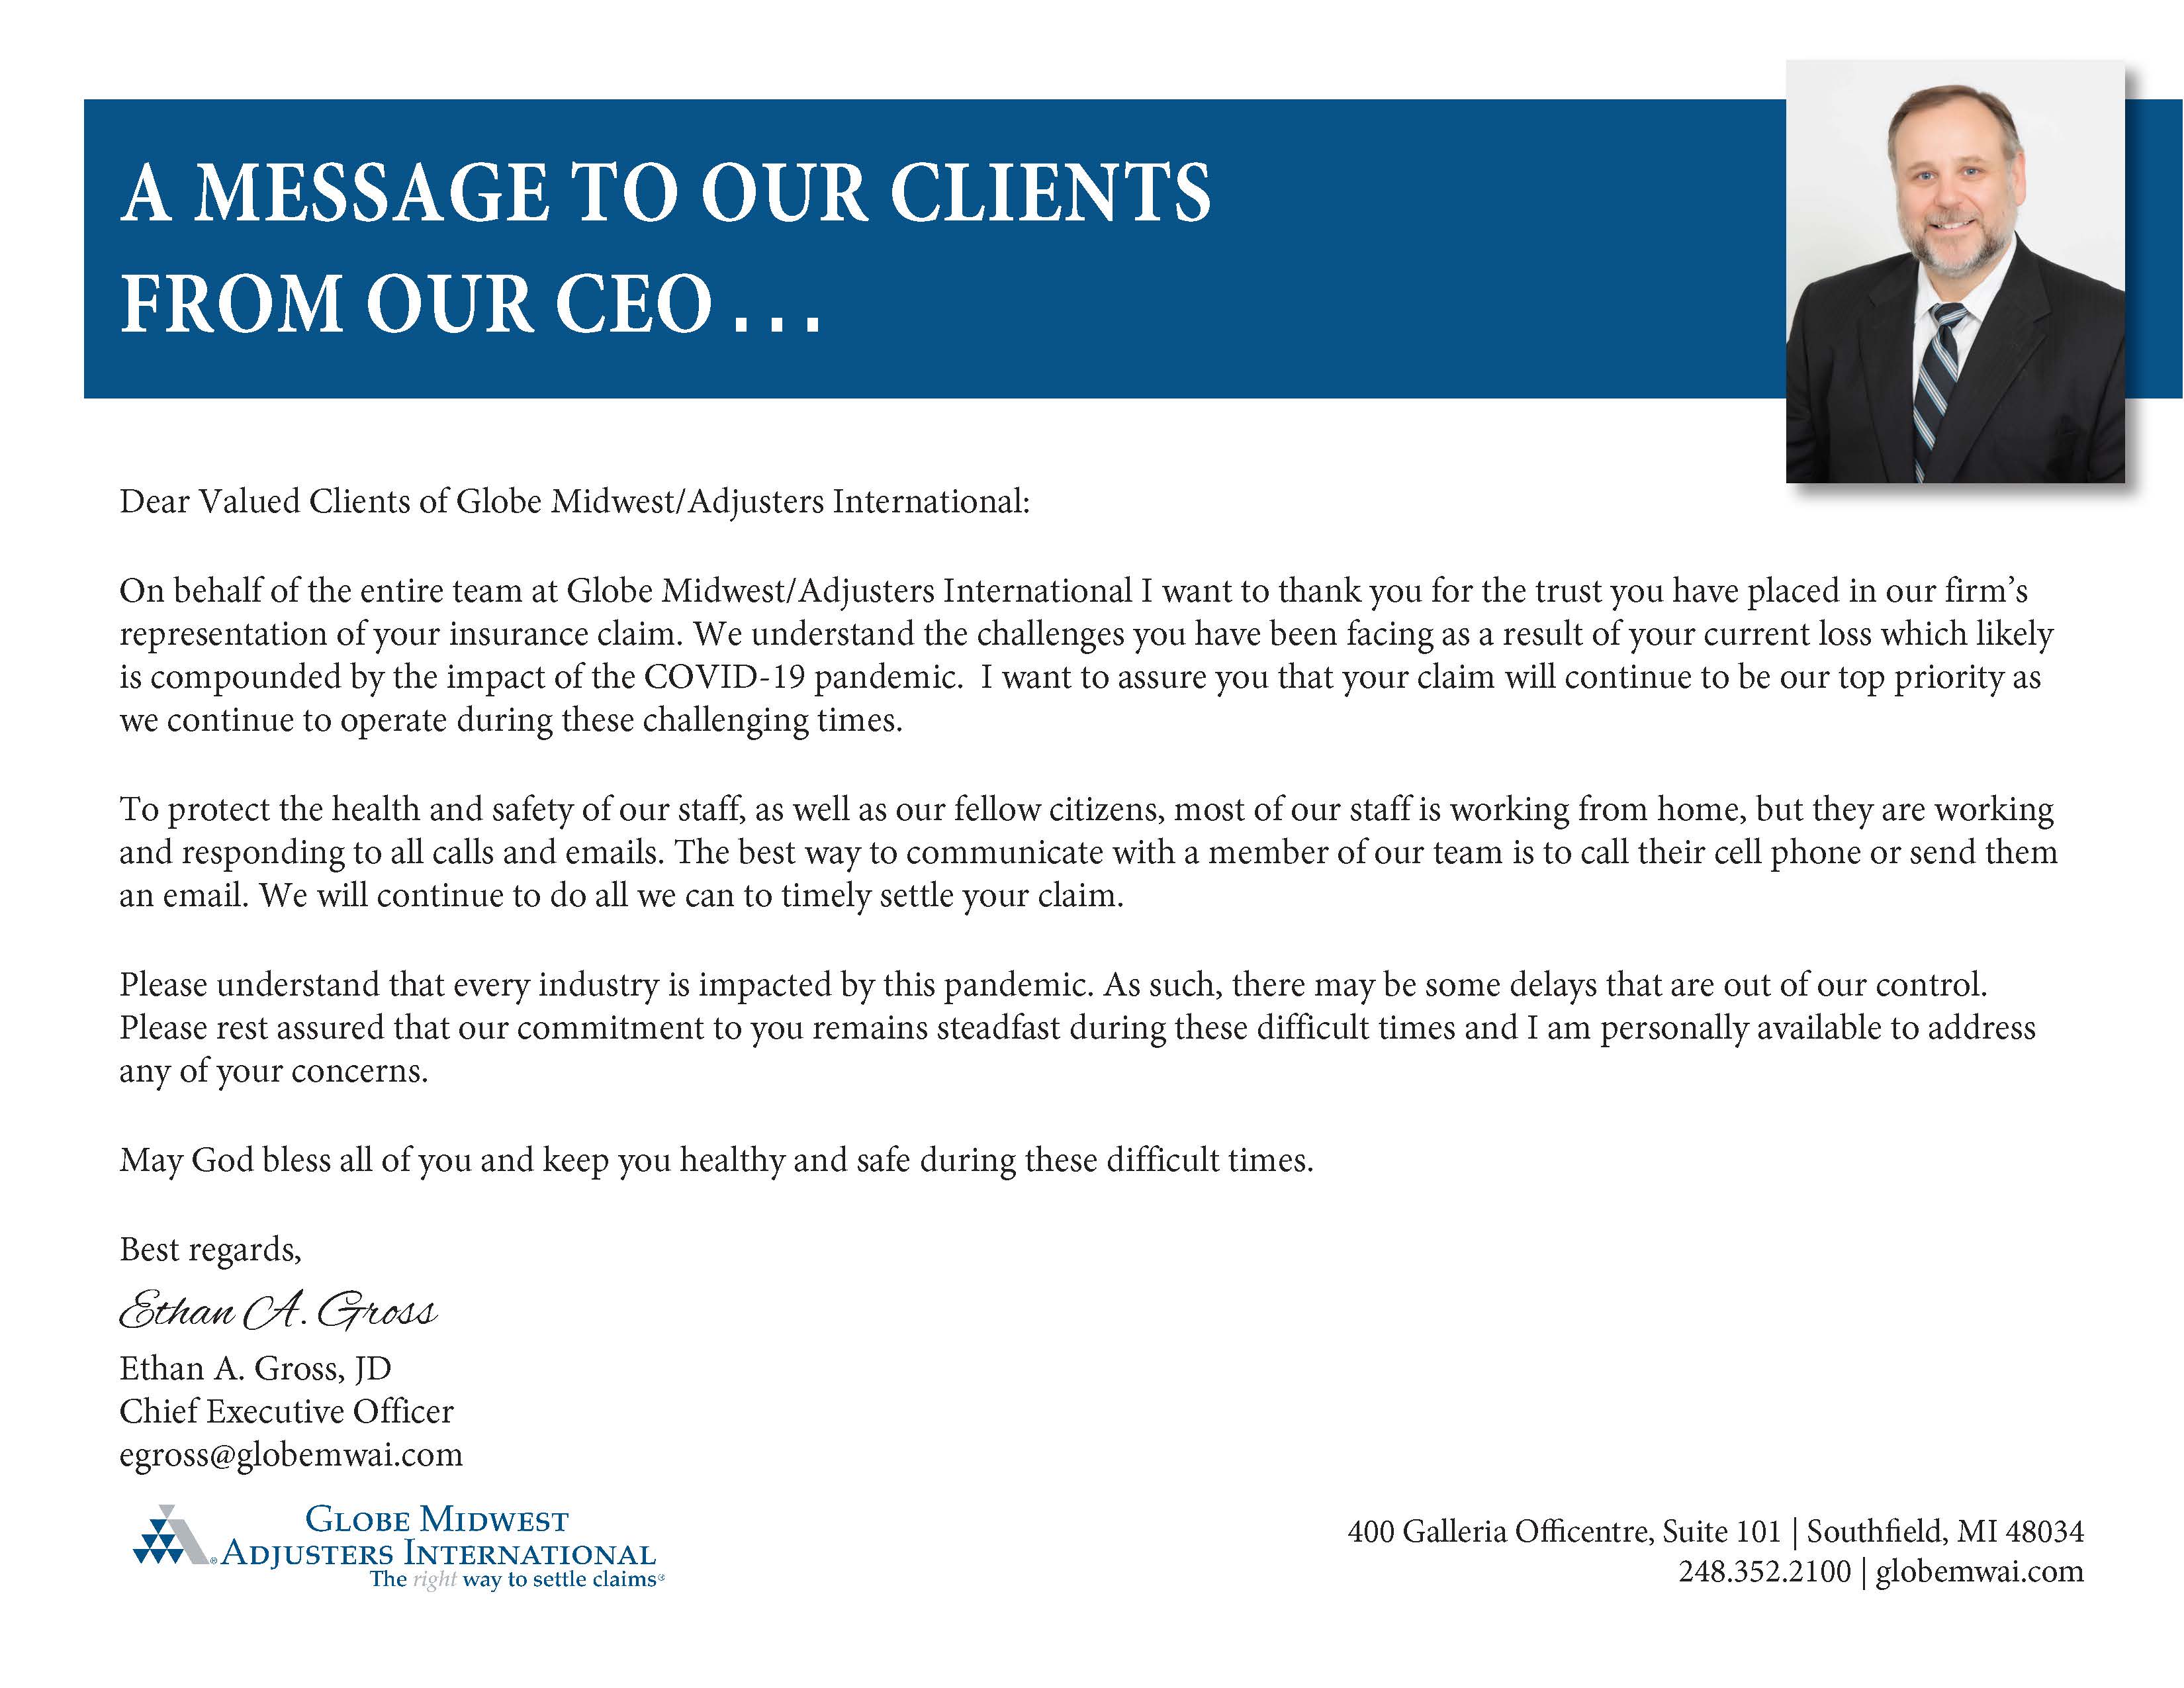 A Message to Our Clients from Our CEO